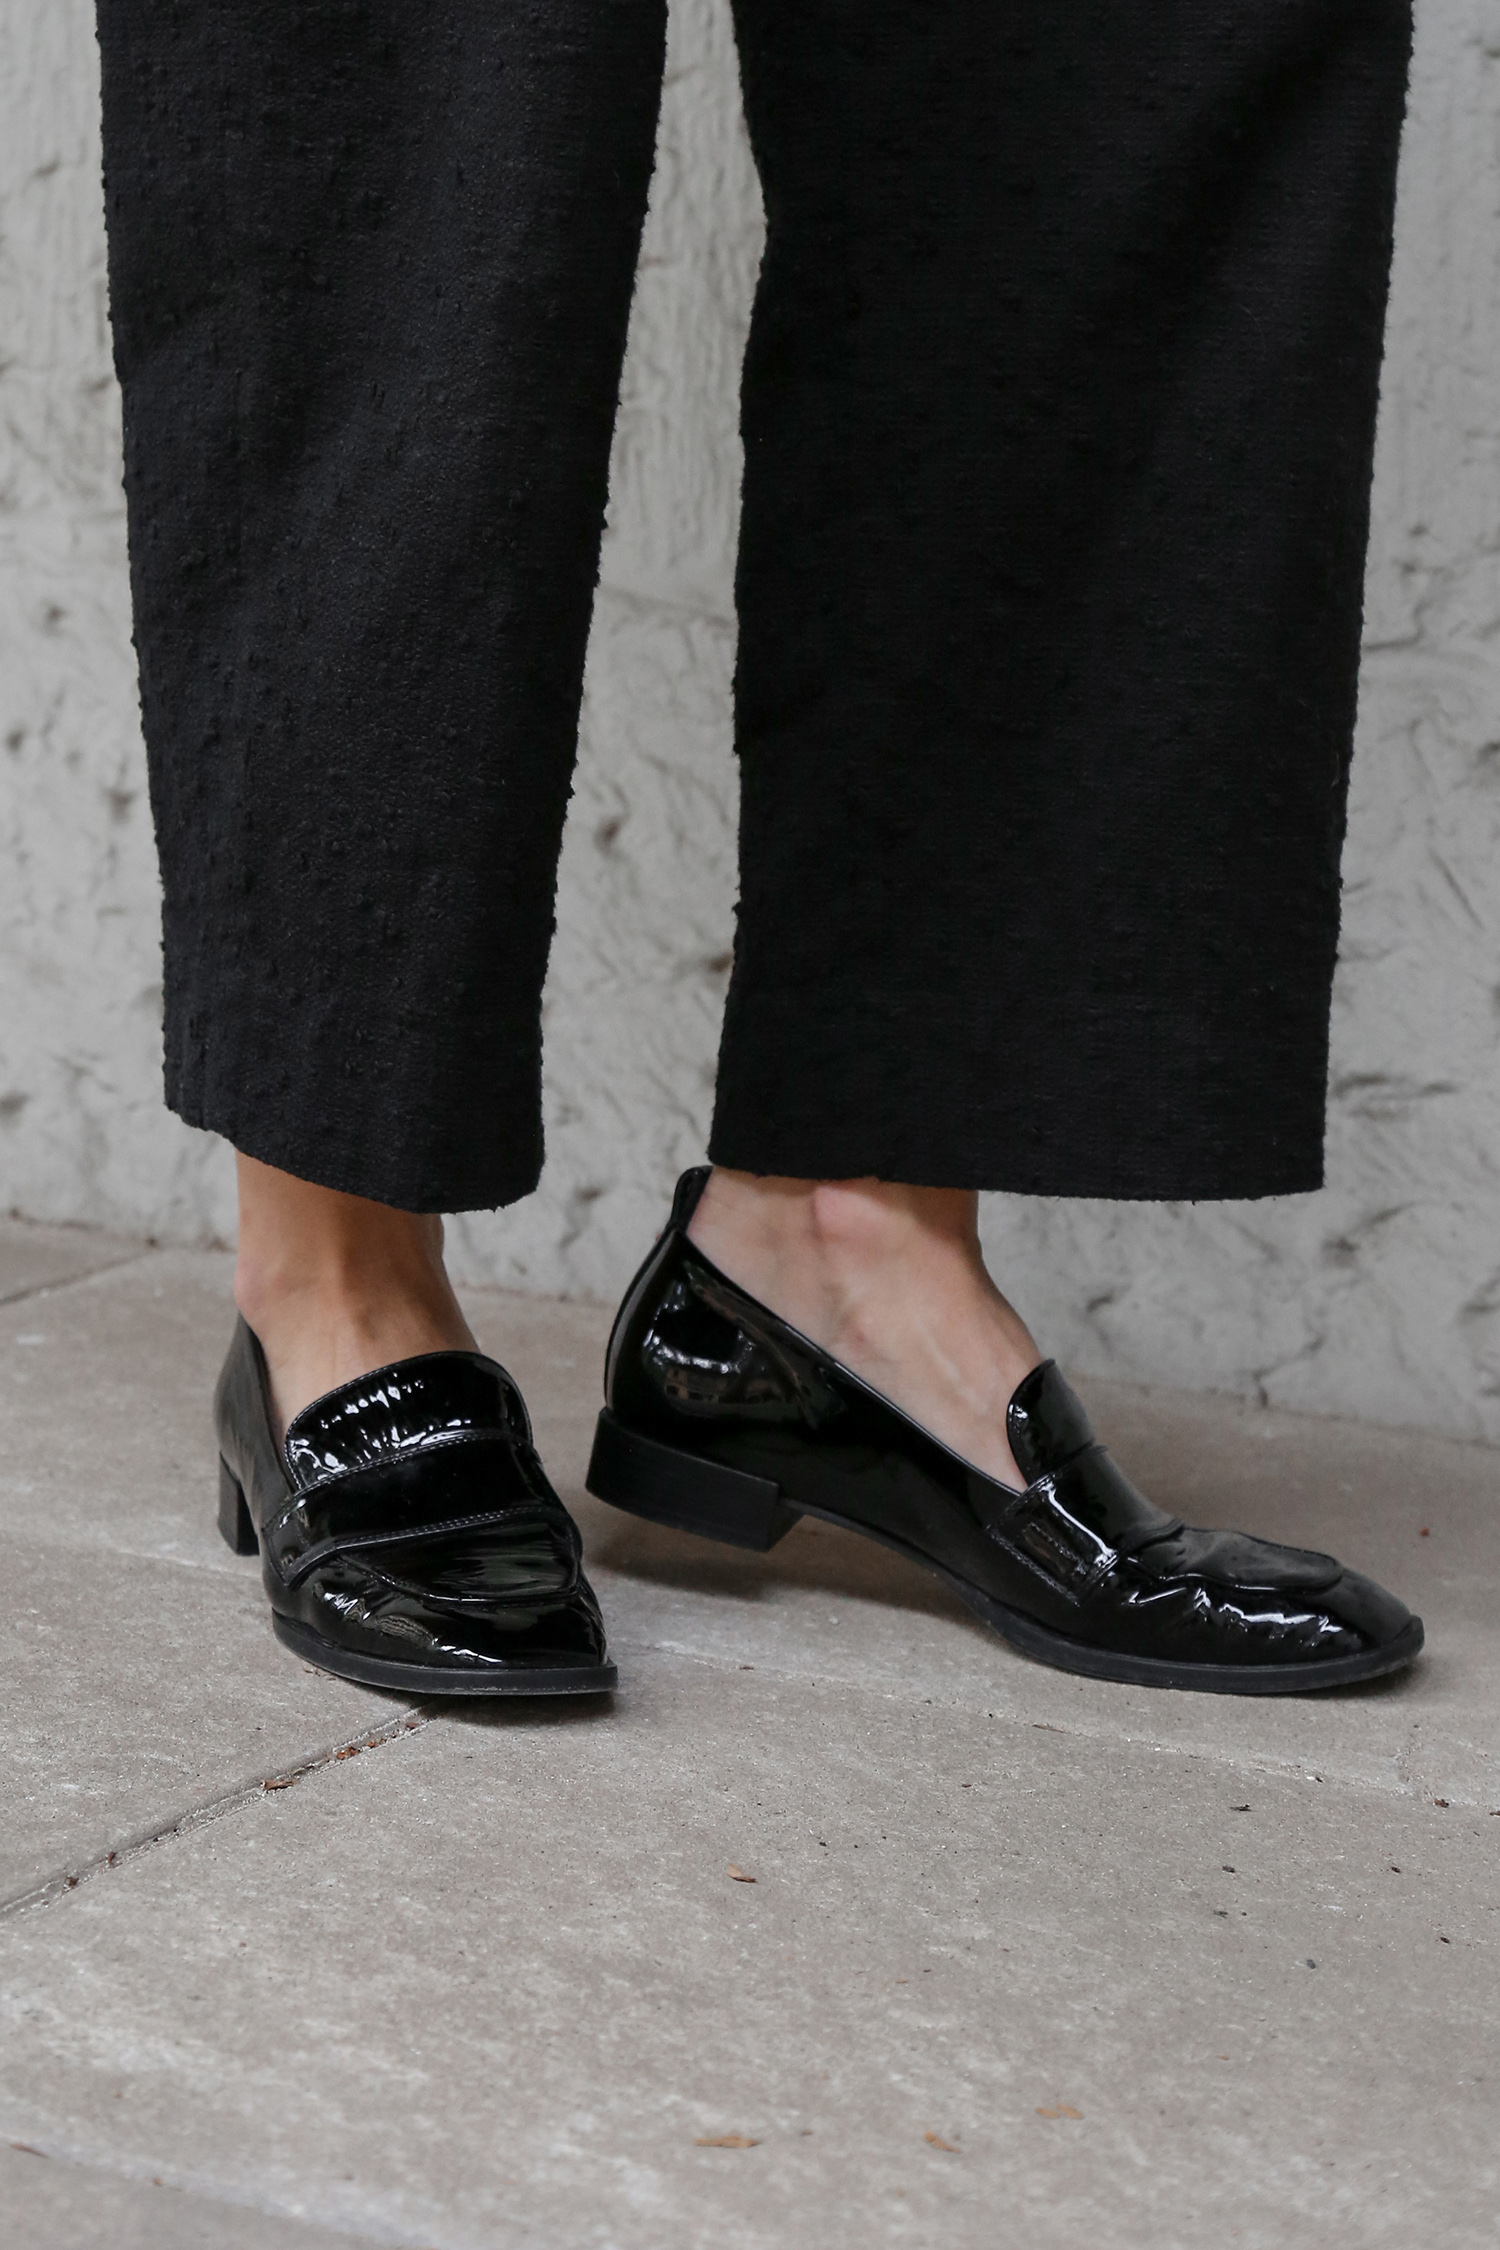 House of Dagmar Valentina Trousers and Aeyde patent loafers